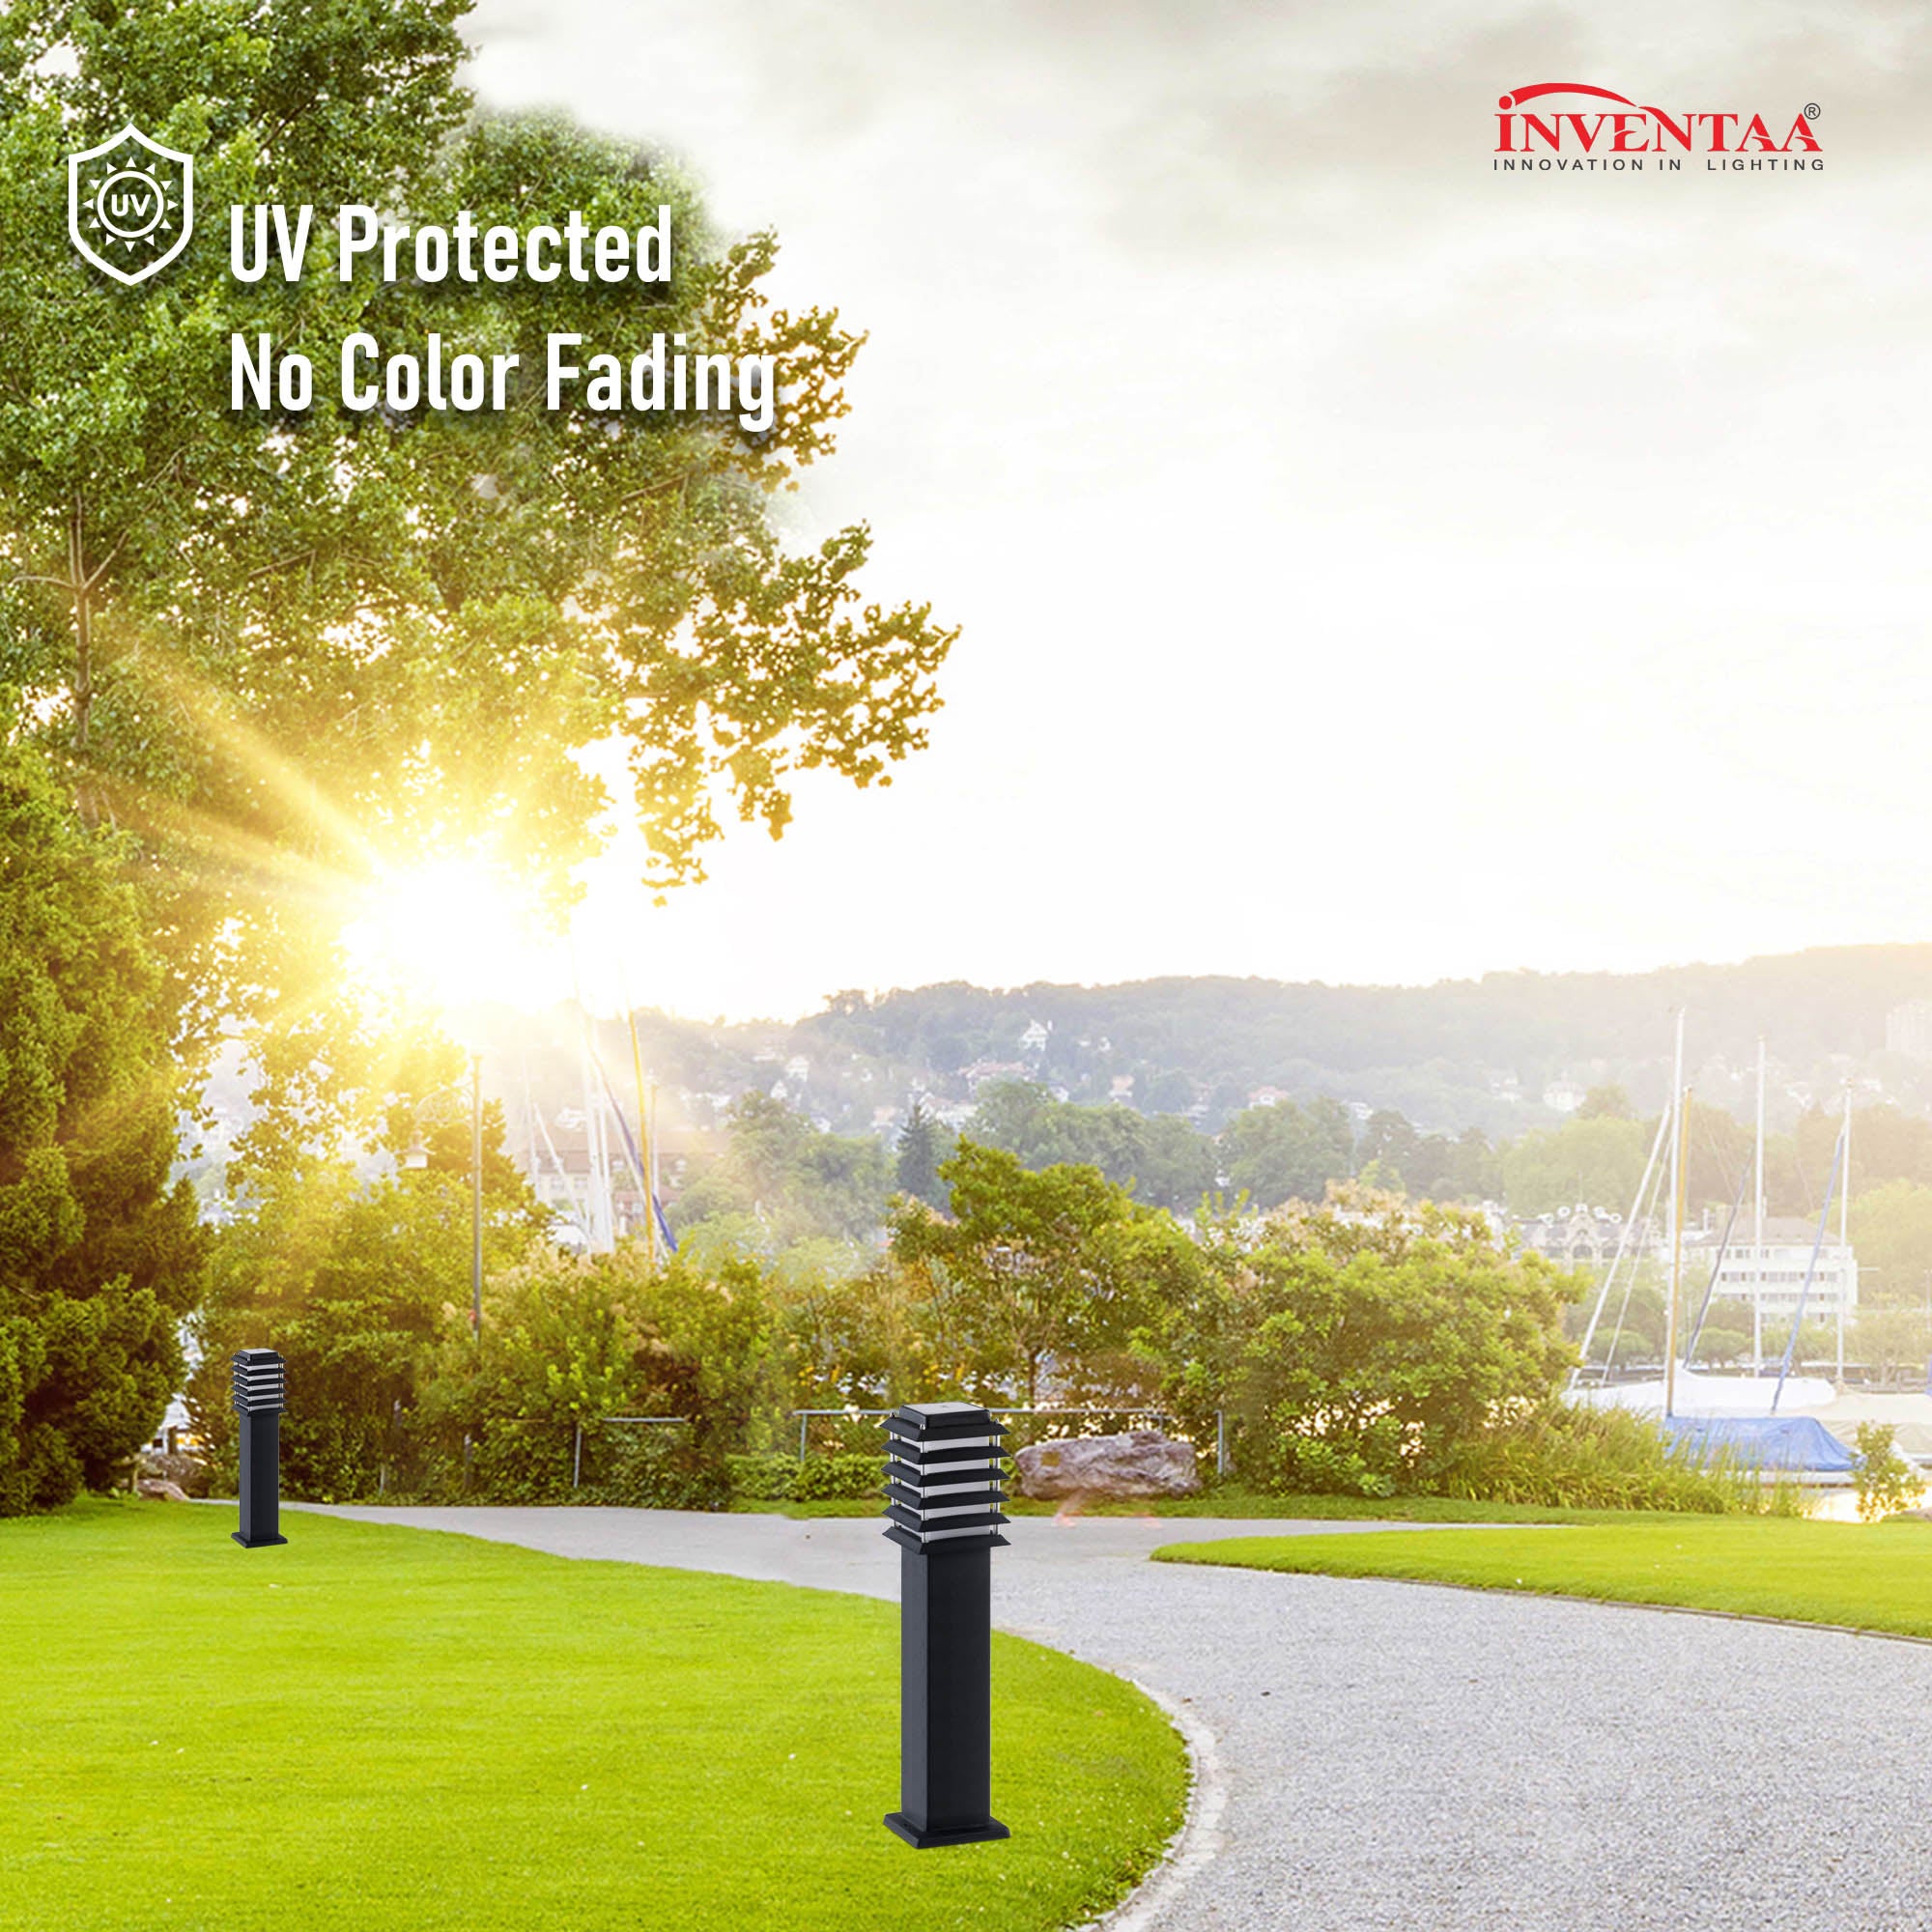  Riya 1 feet led garden bollard light faeturing its UV protection and no color fading resistance for enduring performance #size_1 feet